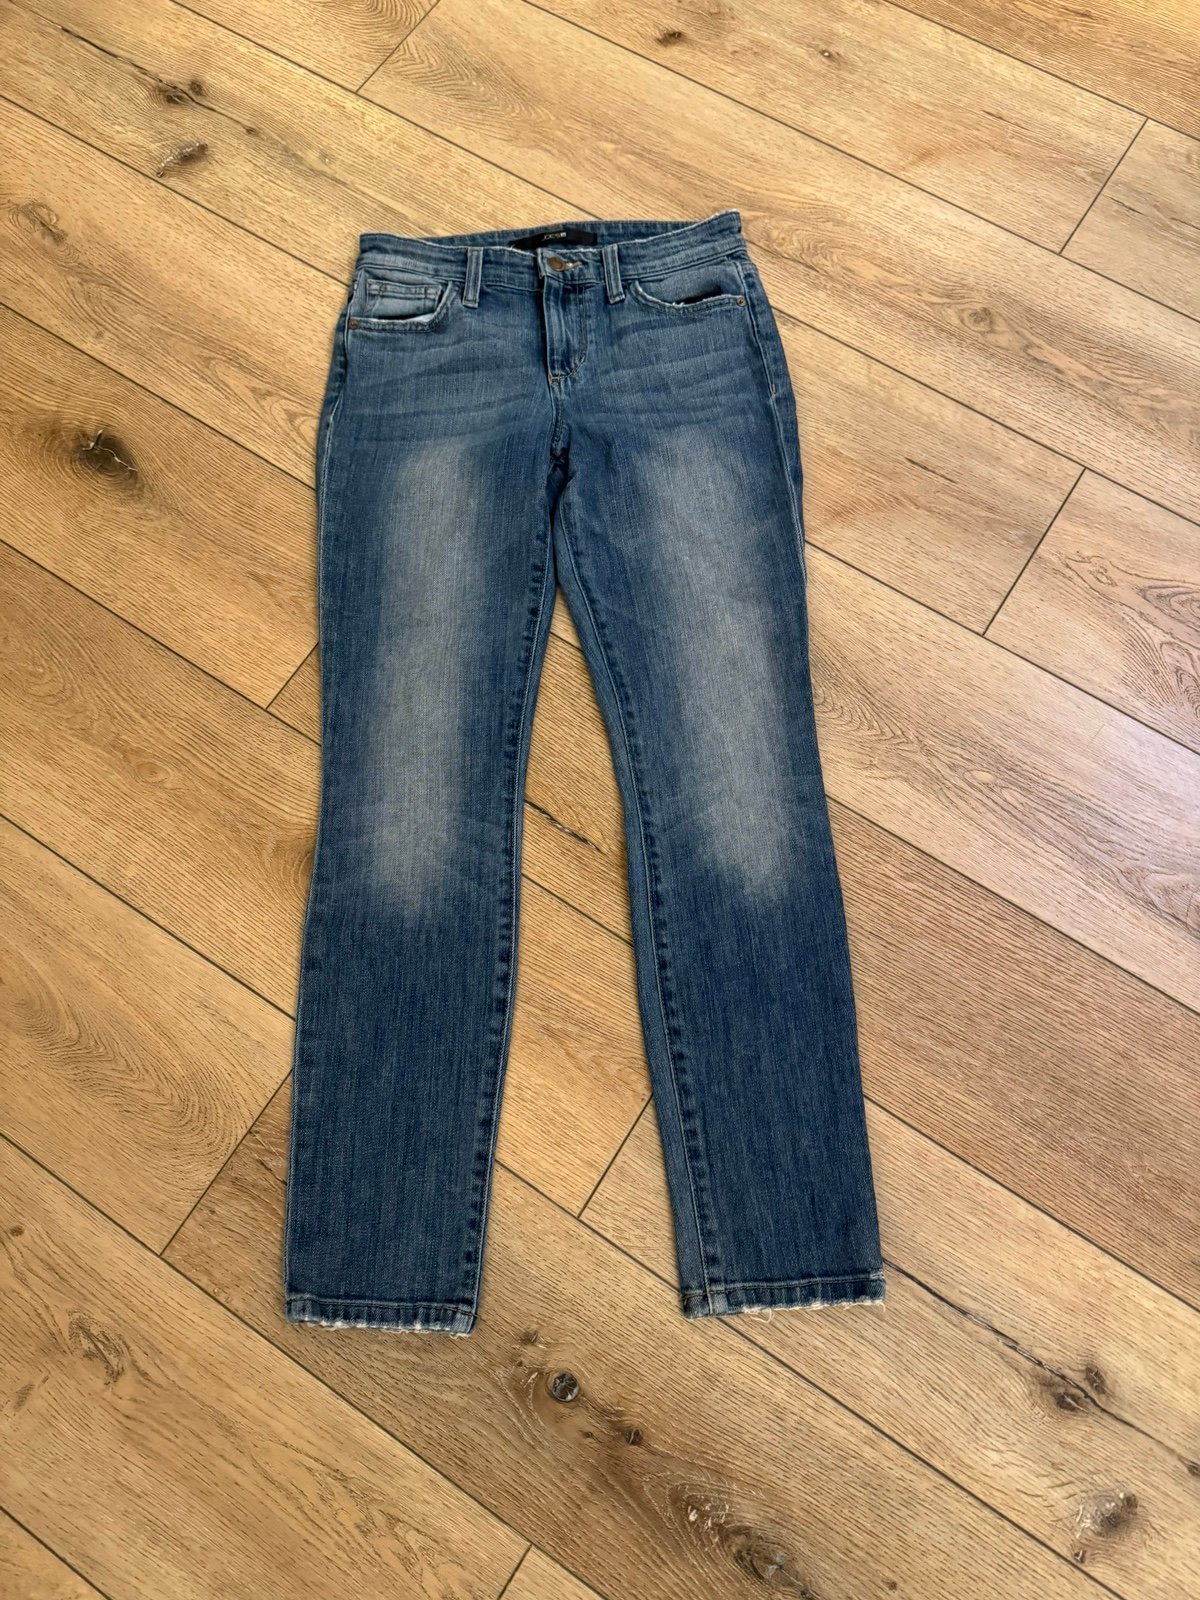 Authentic Joes jeans skinny ankle PiA5hZPRy Outlet Store